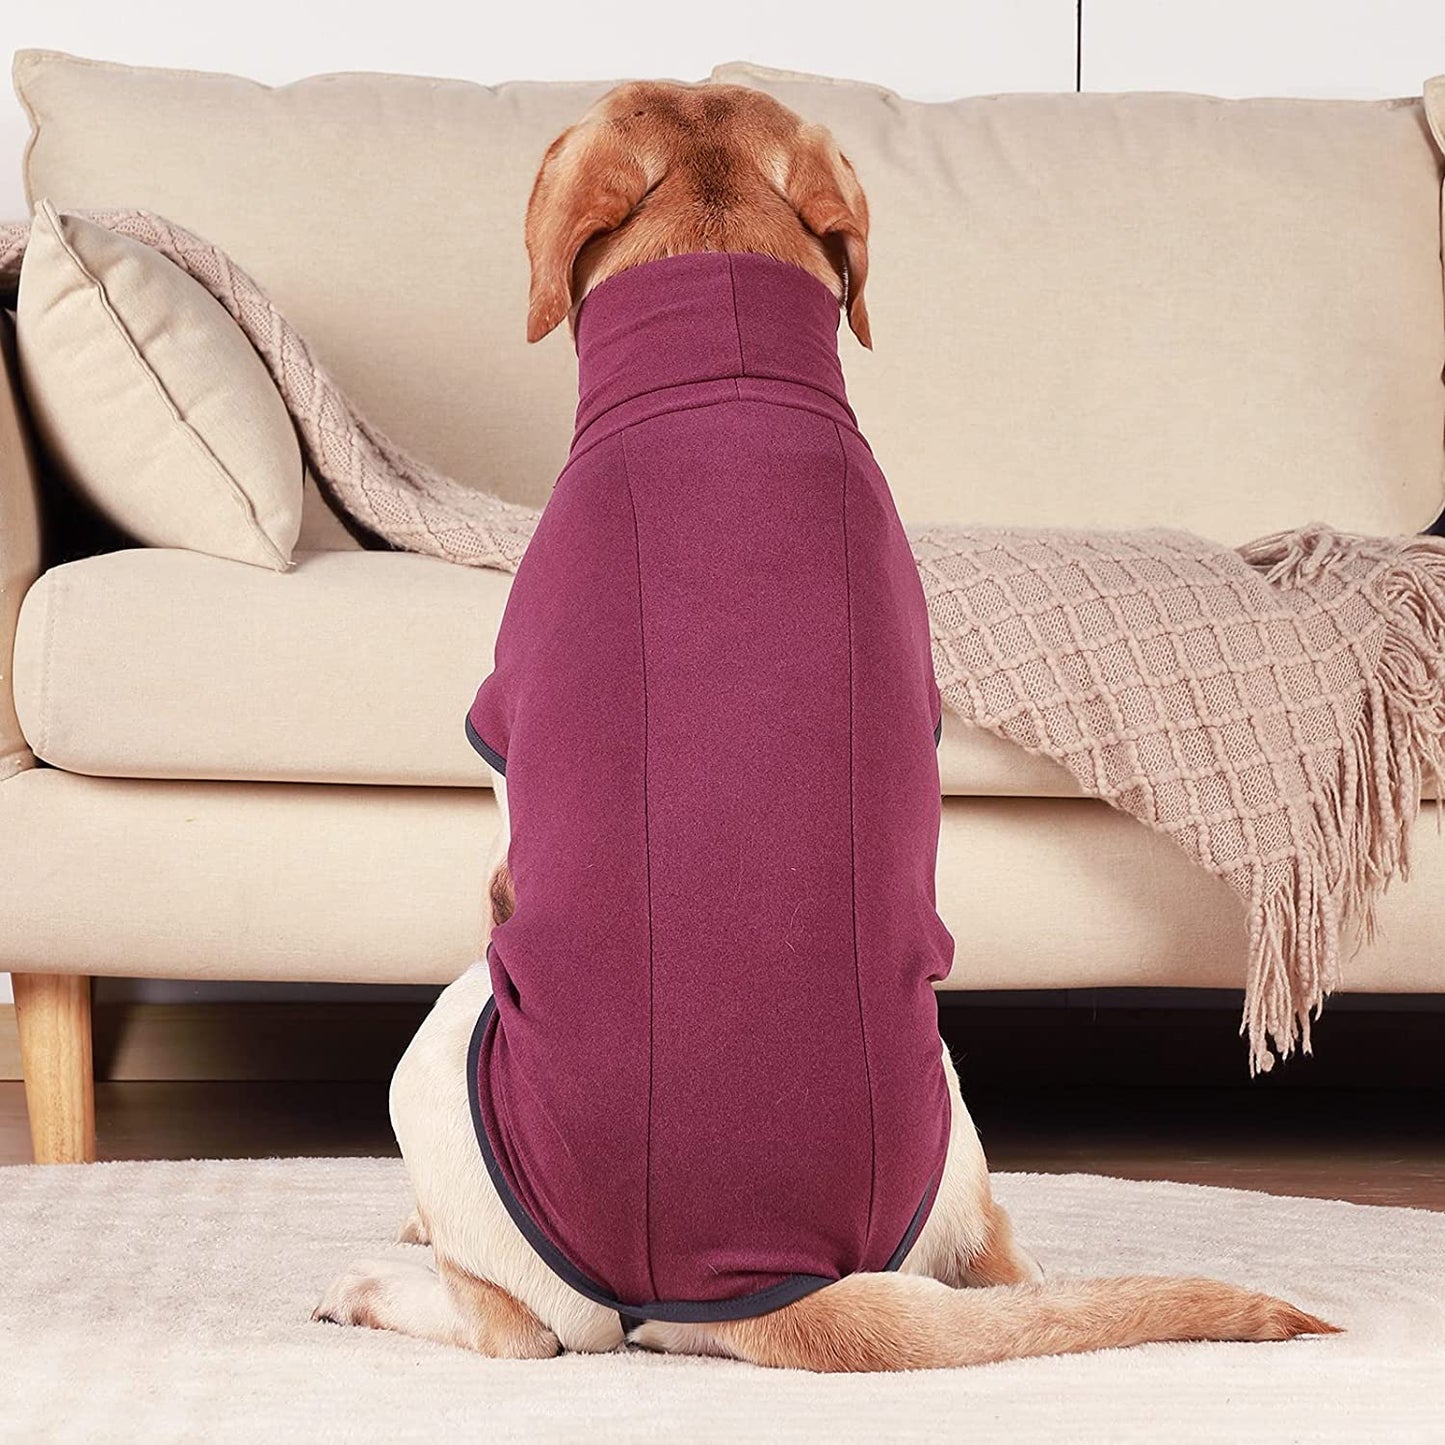 Sweater Pullover Cold Weather Vest for Dogs